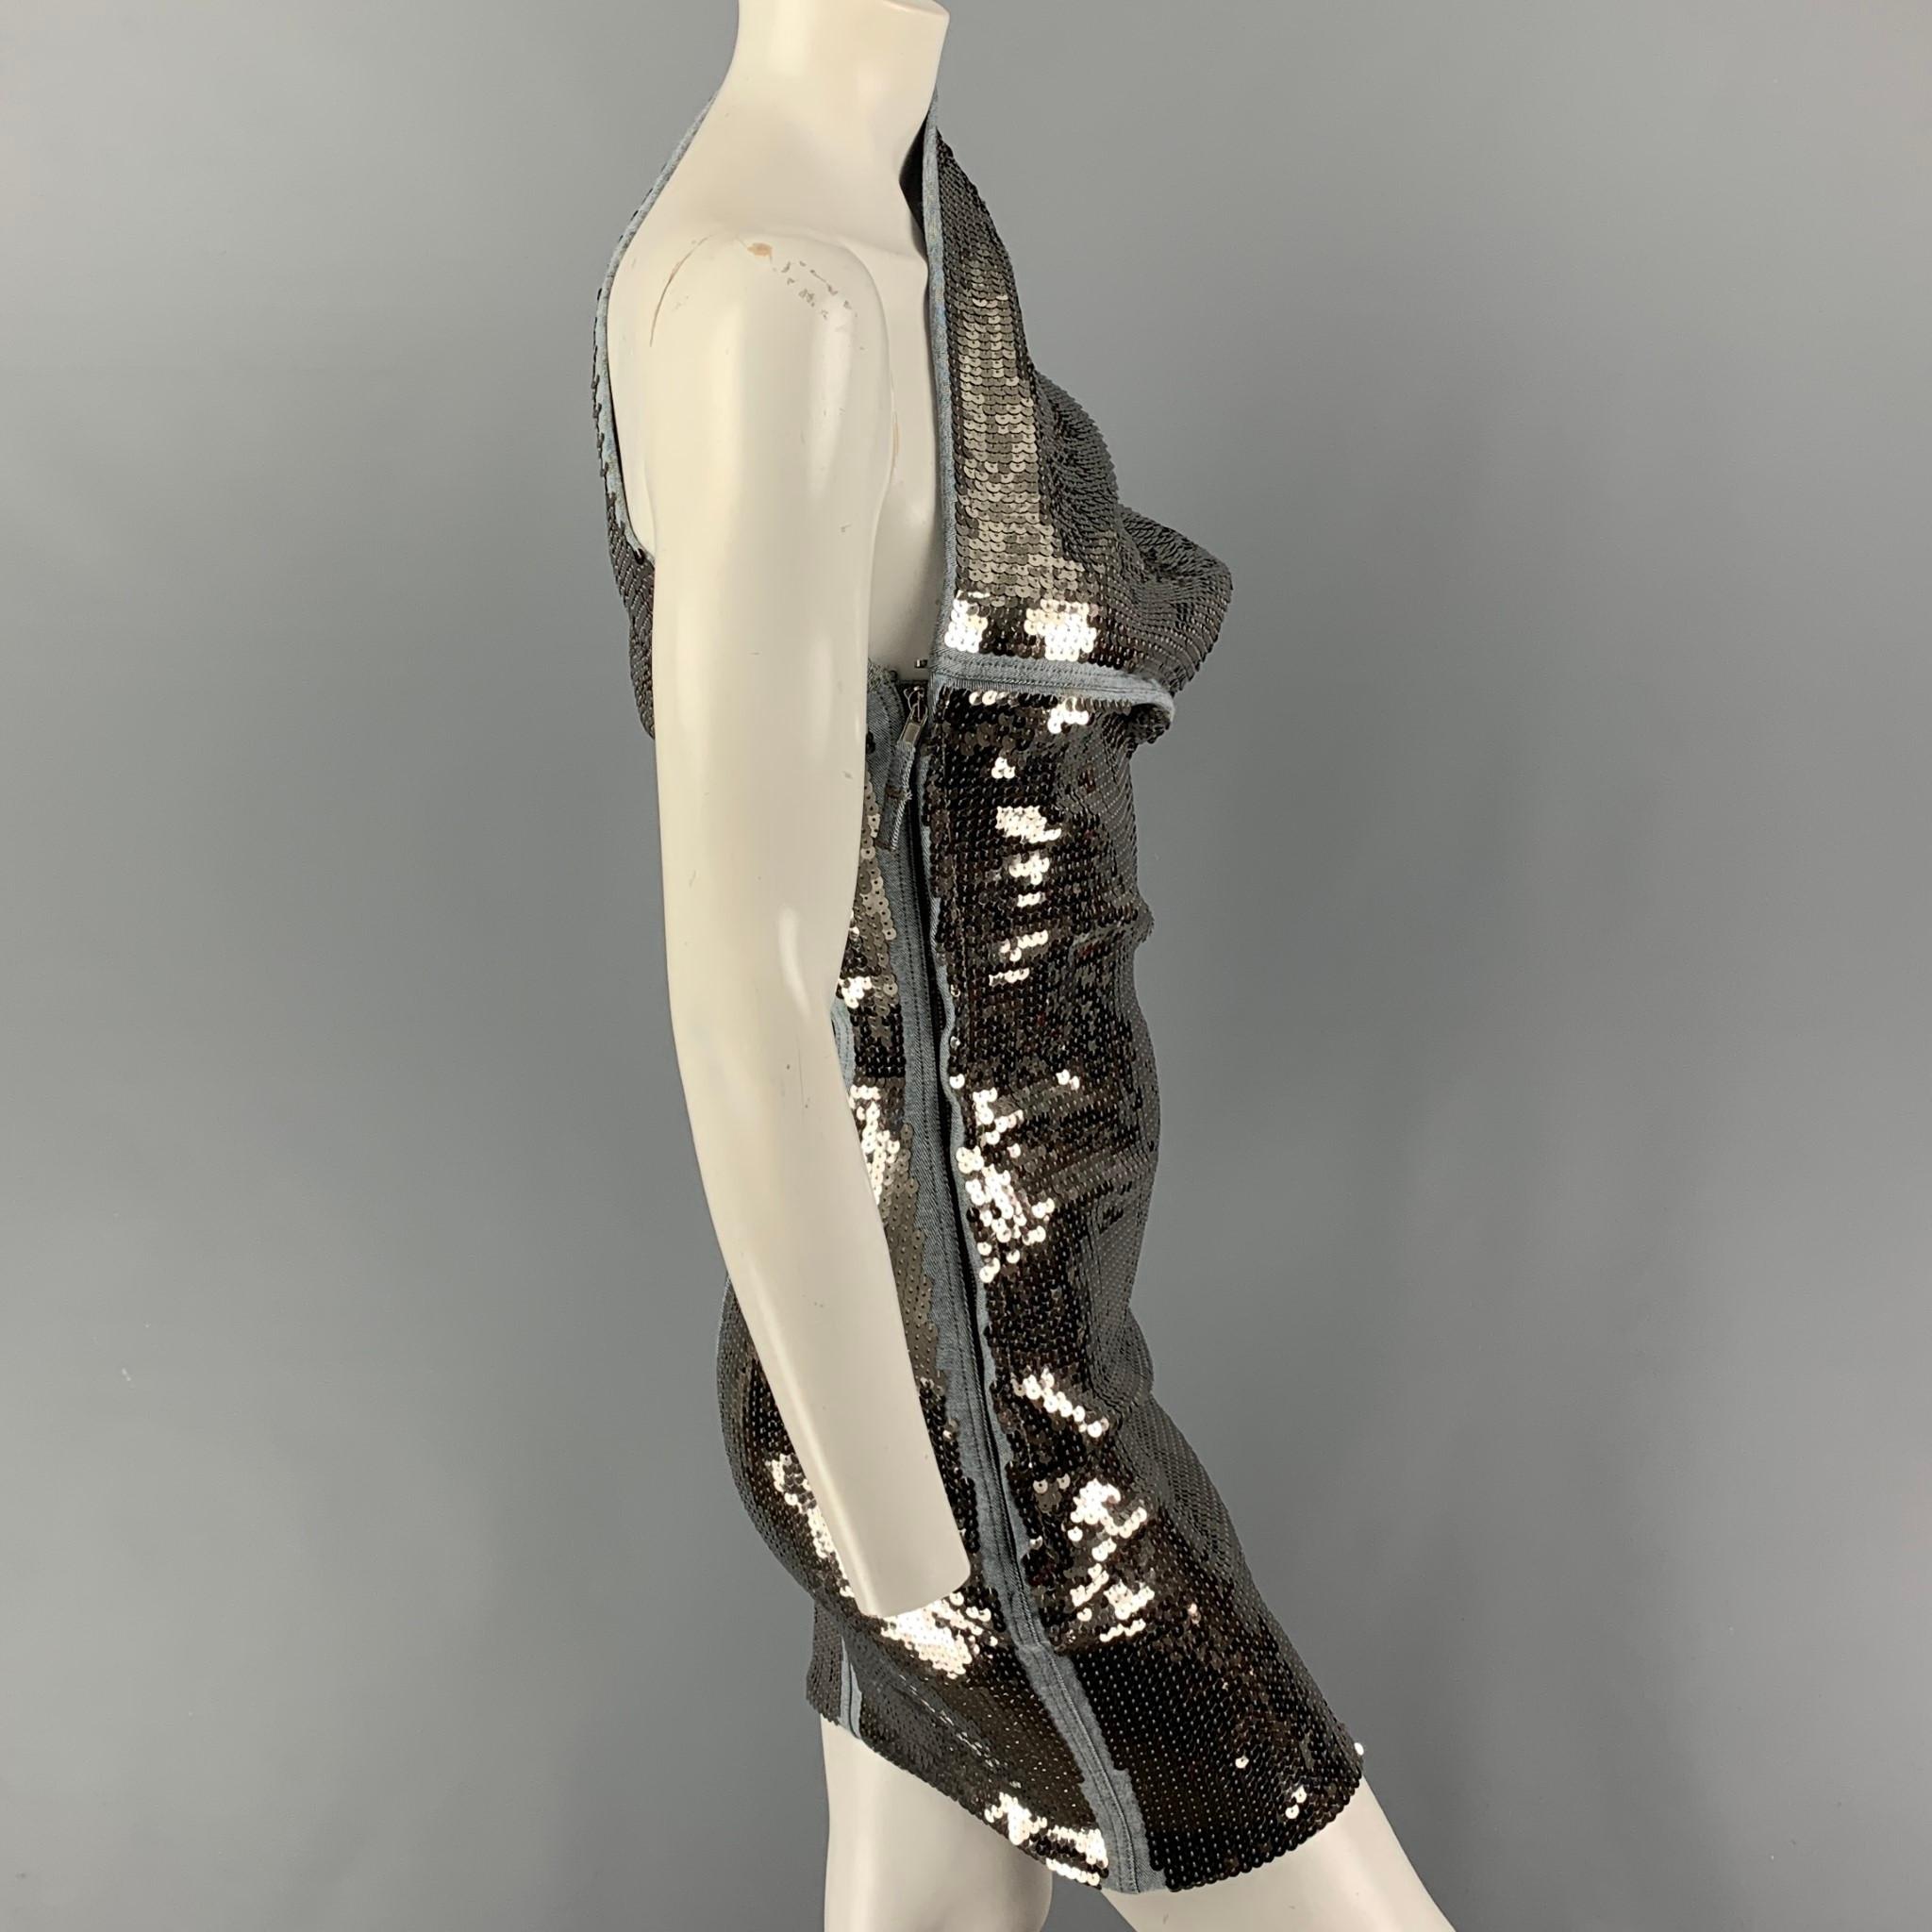 RICK OWENS STROBE FW 22 'Diana' dress comes in a silver sequined cotton blend with a blue denim trim featuring a over the shoulder draped sculptural silhouette, single sleeve, and a concealed hook & zip closure. 

Very Good Pre-Owned